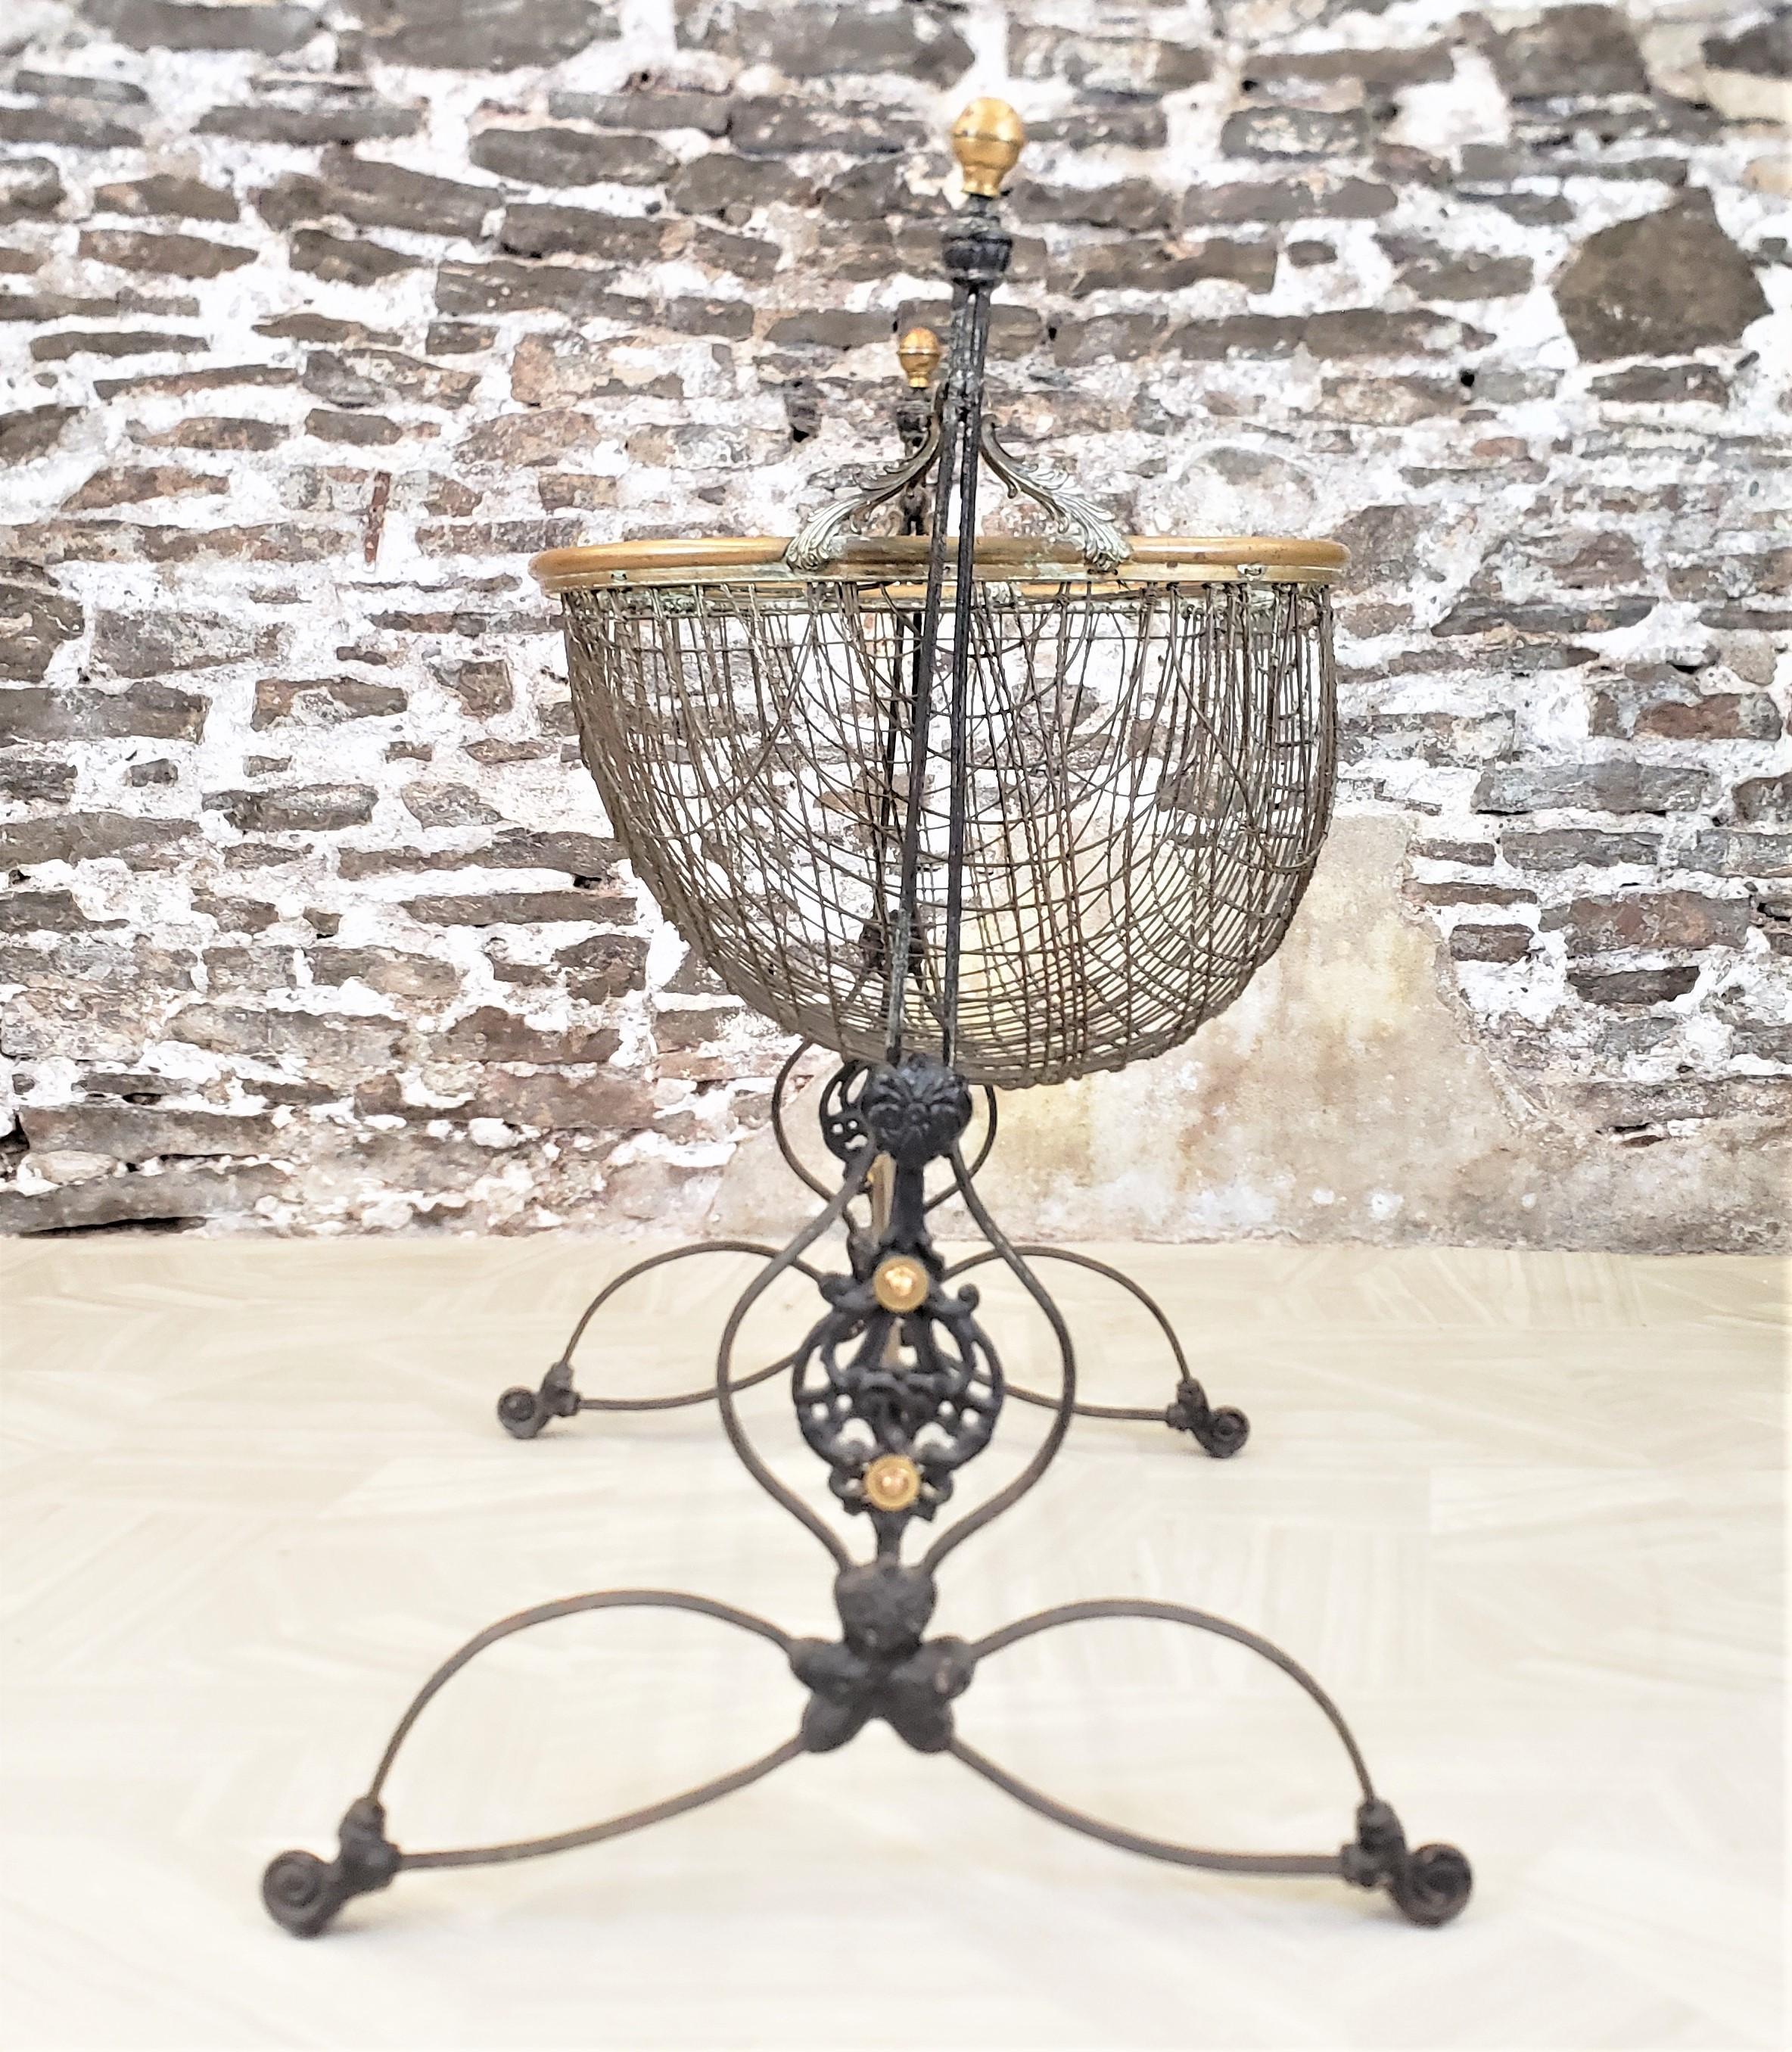 19th Century Antique Victorian Ornate Cast Iron & Brass Swinging Baby Cradle or Plant Stand For Sale